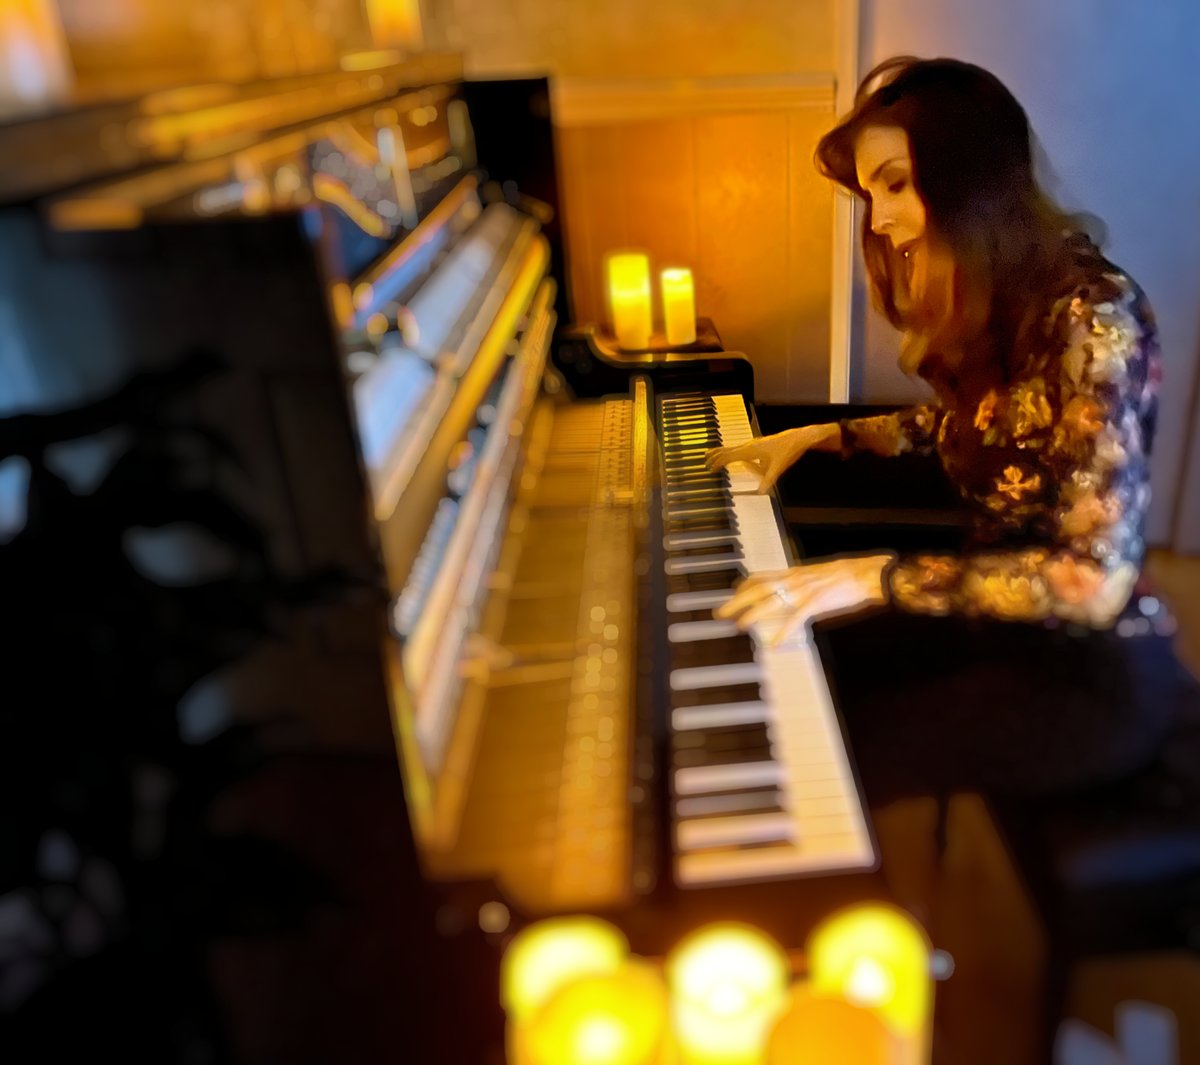 You guys, I'm getting ready for 3rd Thursday and the next release in my #CandlelightPiano series! This month I will be creating a #pianocover of #FieldsofGold by #Sting - Is this one of the most beautiful songs ever written? In my humble opinion... yes. I very much look forward